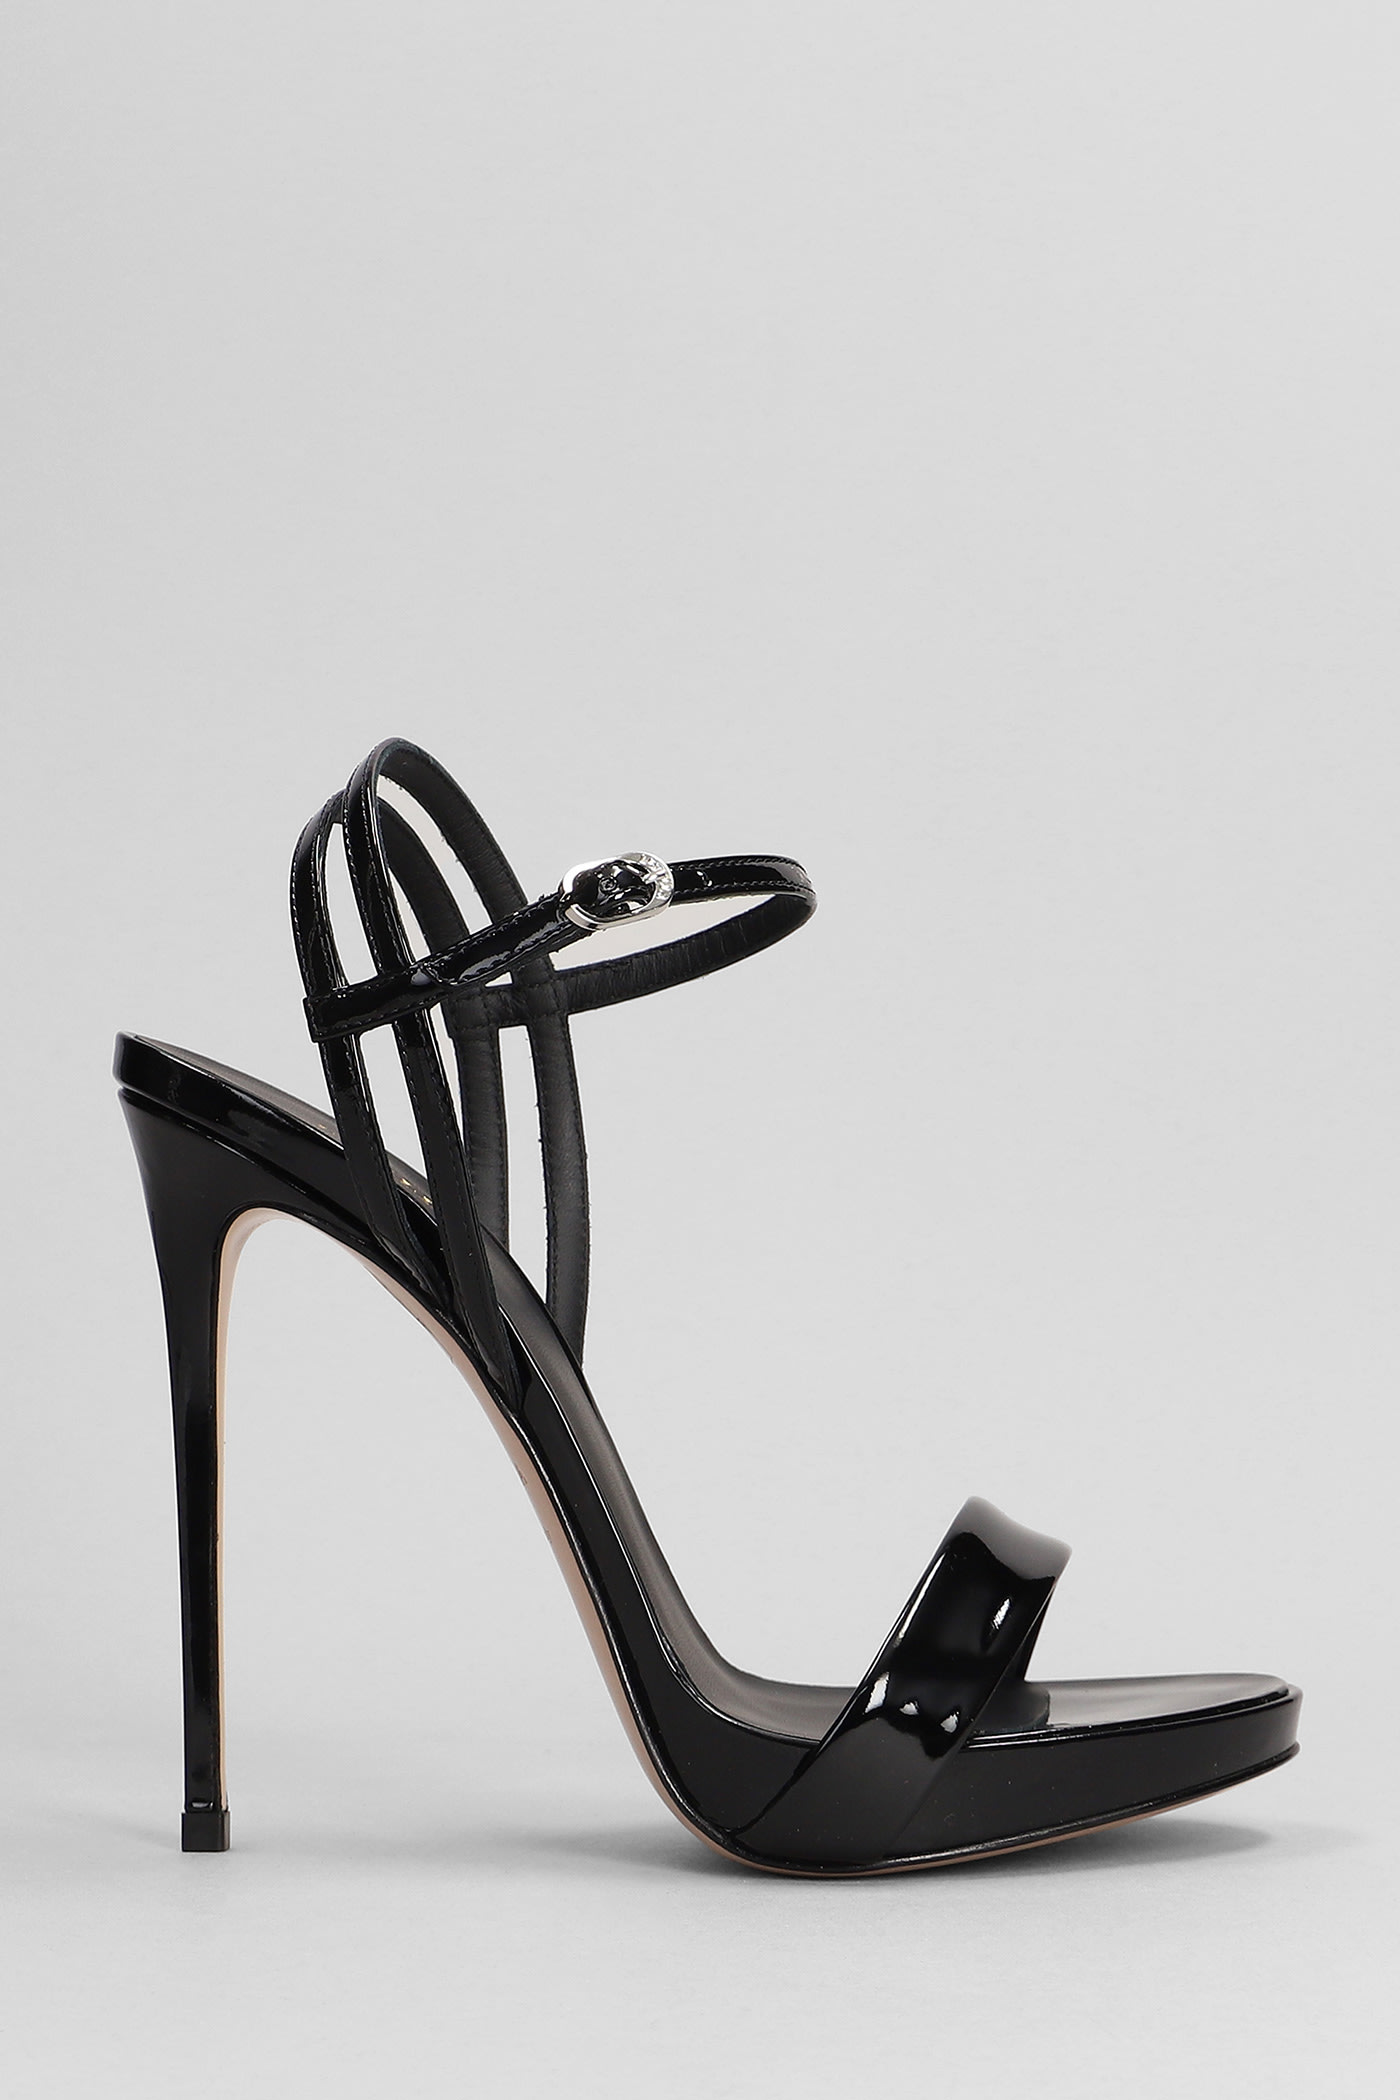 LE SILLA GWEN SANDALS IN BLACK PATENT LEATHER